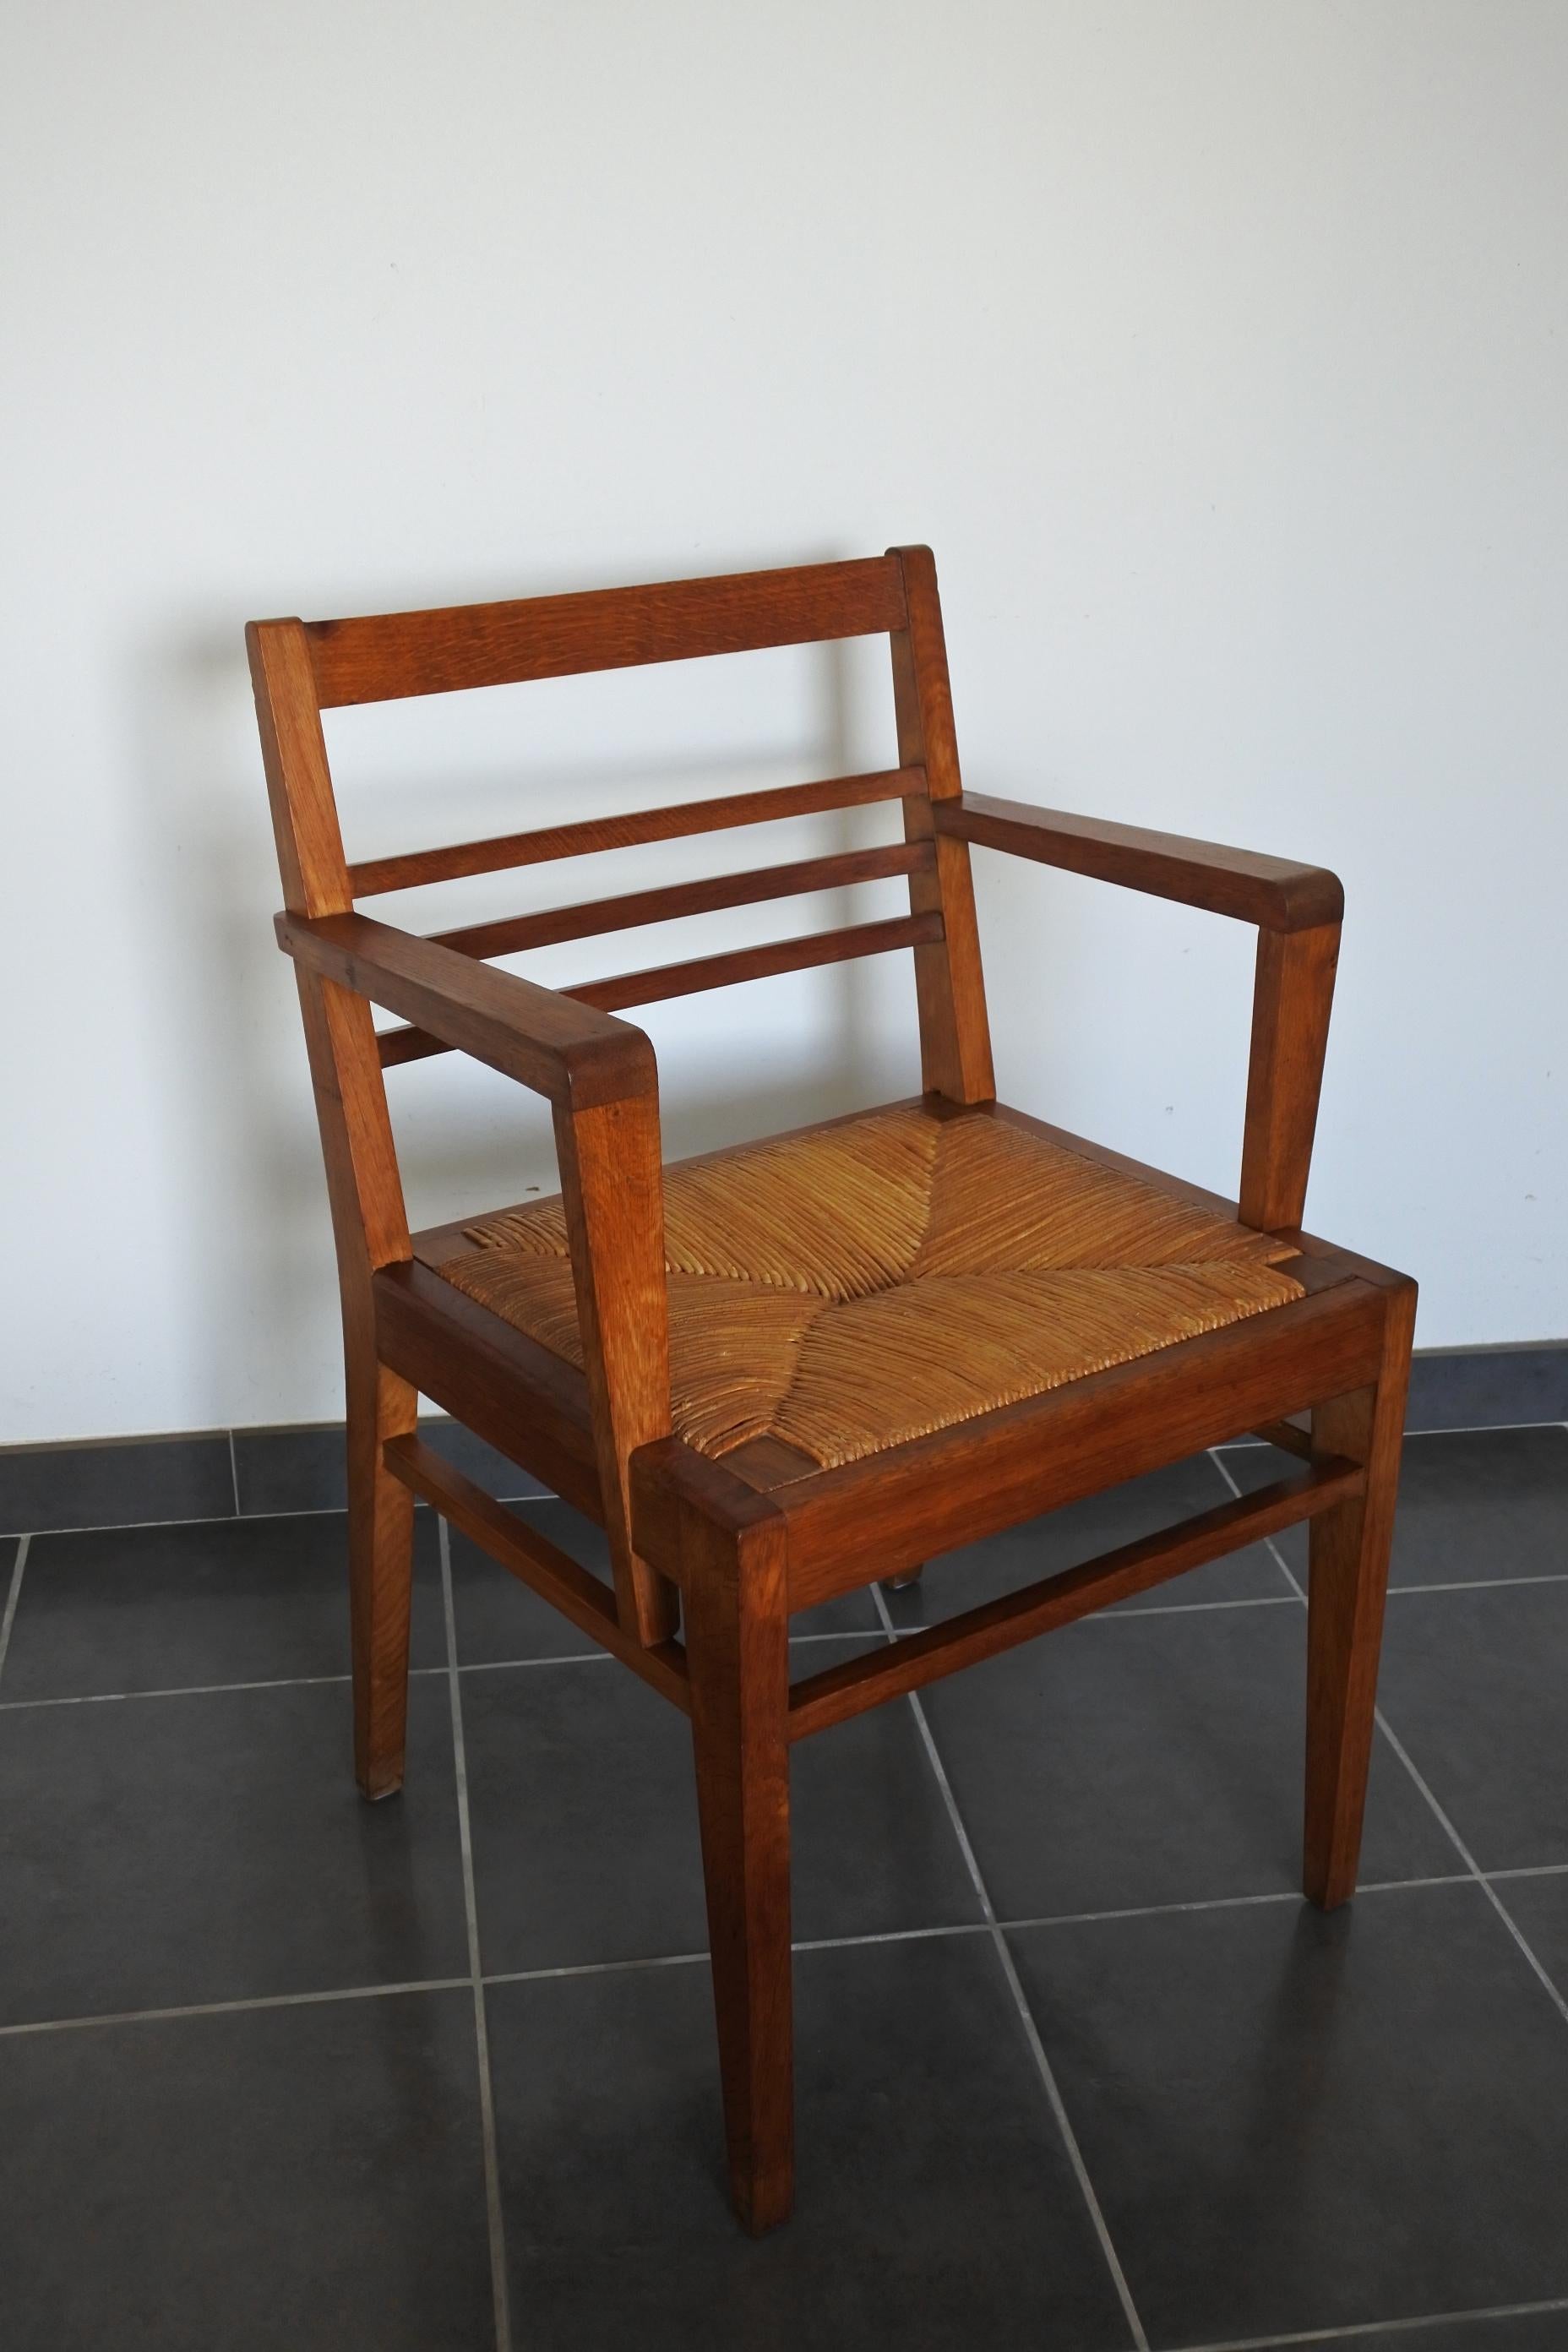 Armchair by french designer René Gabriel.
Solid oak and rush seat.
Made in France during the Reconstruction period, late 1940s.
Signed.

Outstanding wood grain, great original condition.